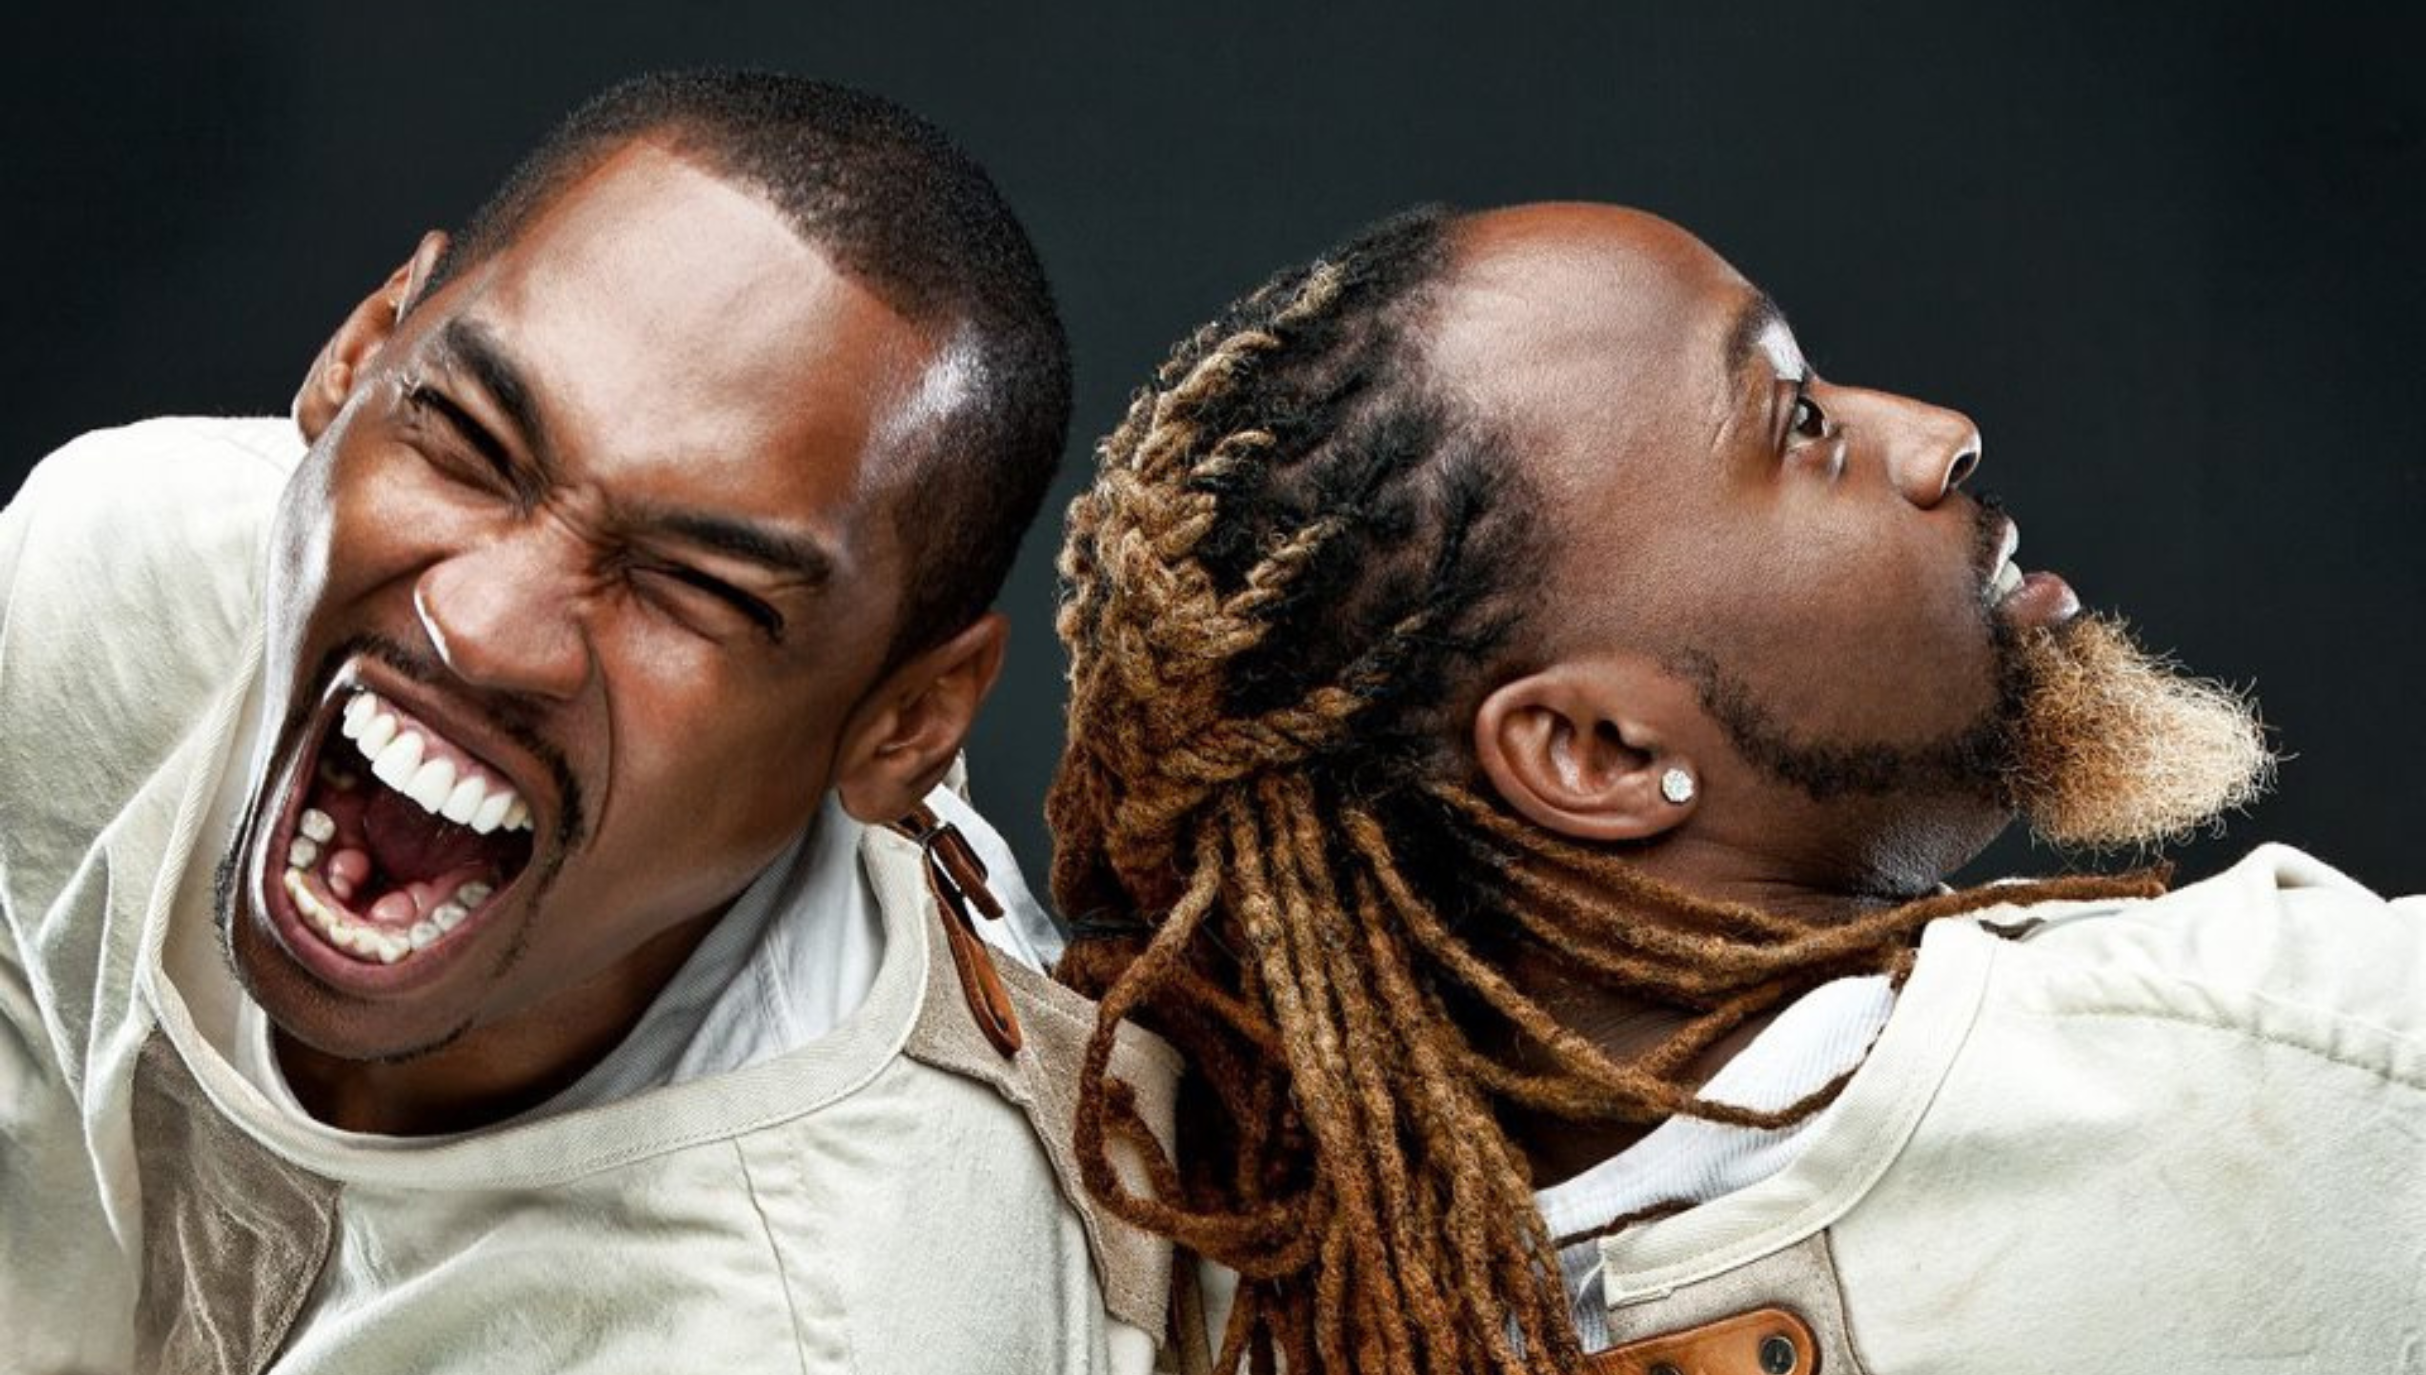 Ticket Reselling Ying Yang Twins Live in Concert